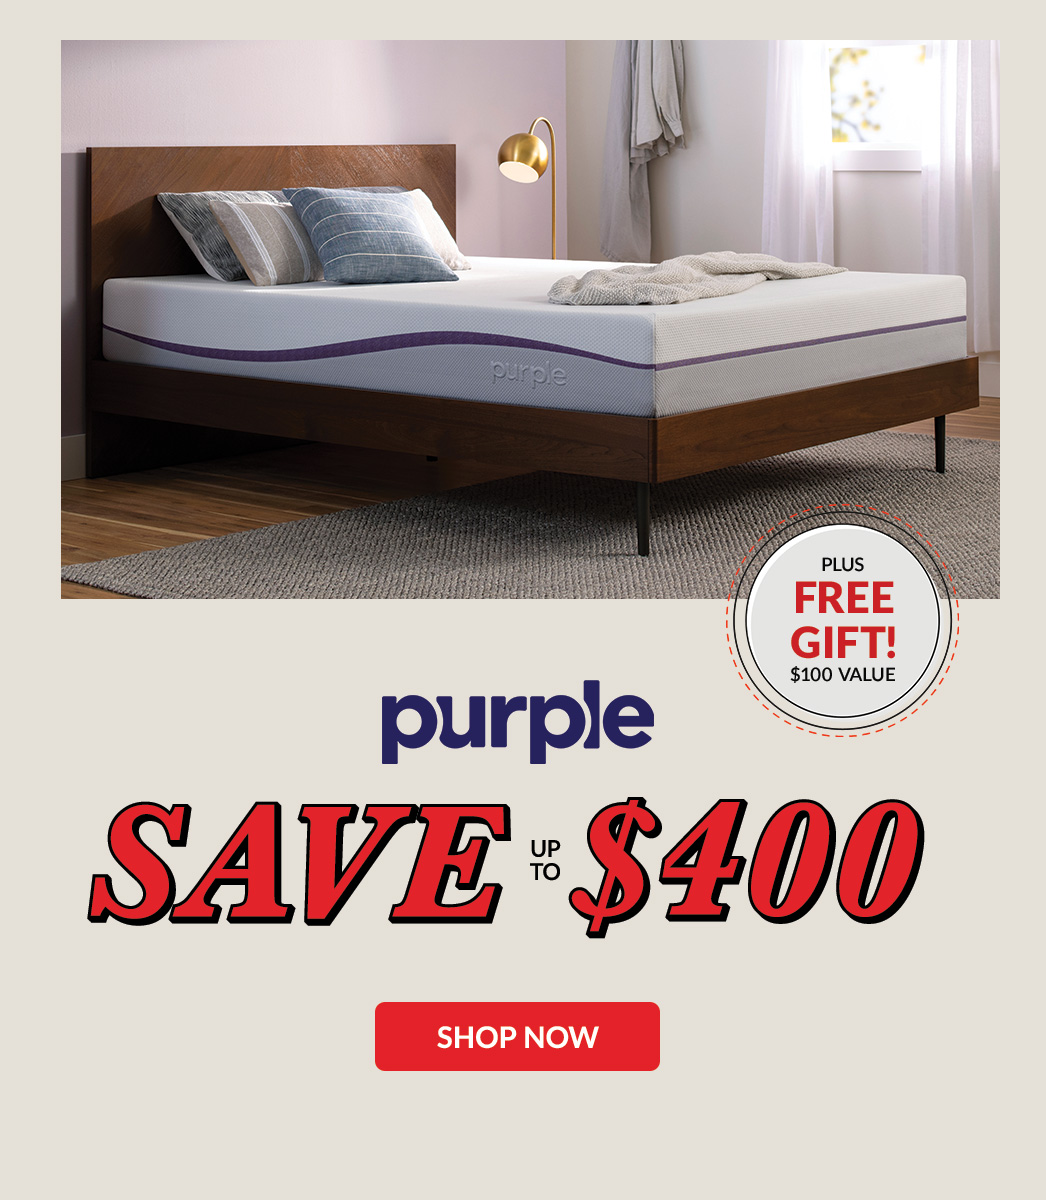 Purple Save up to $400